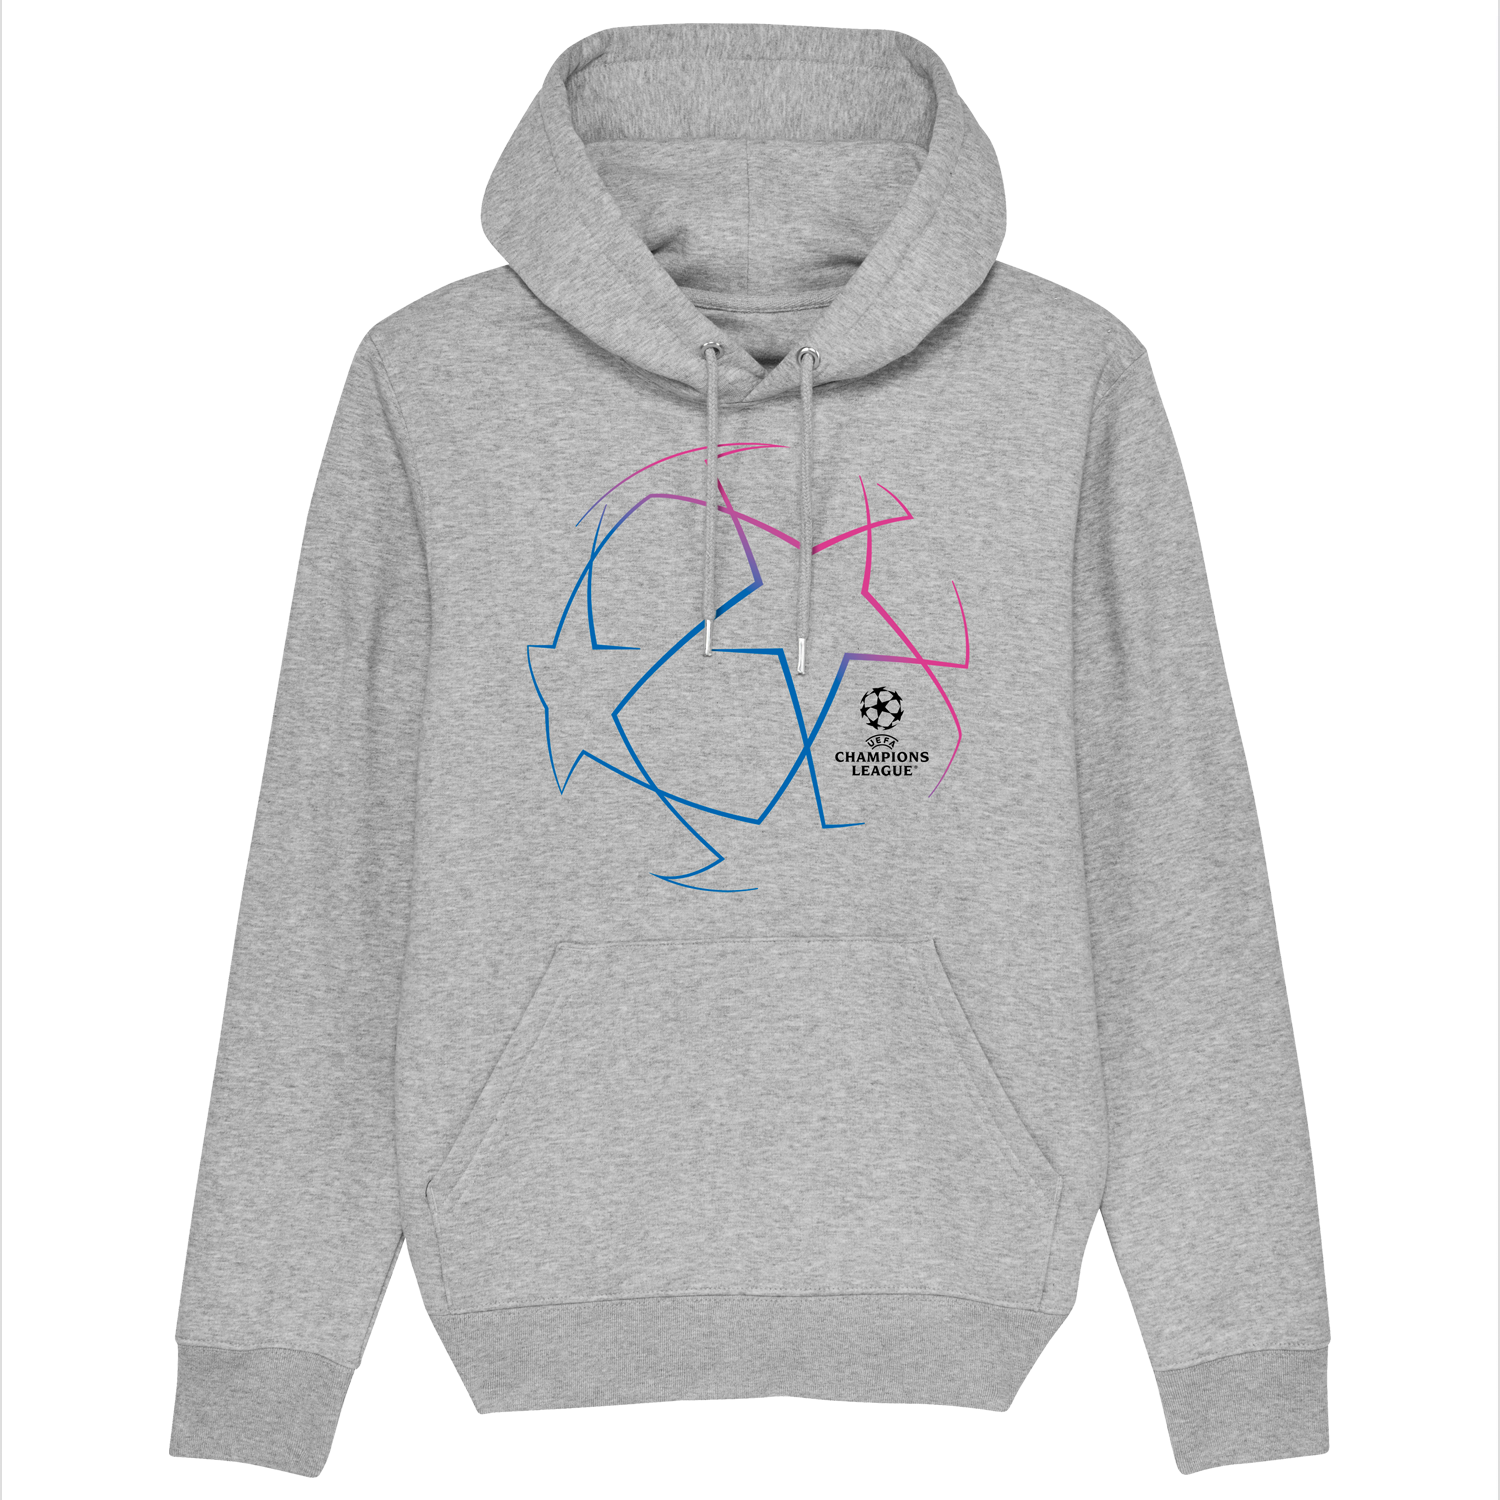 UEFA Champions League - Starball Grey Hoodie UEFA Club Competitions Online Store